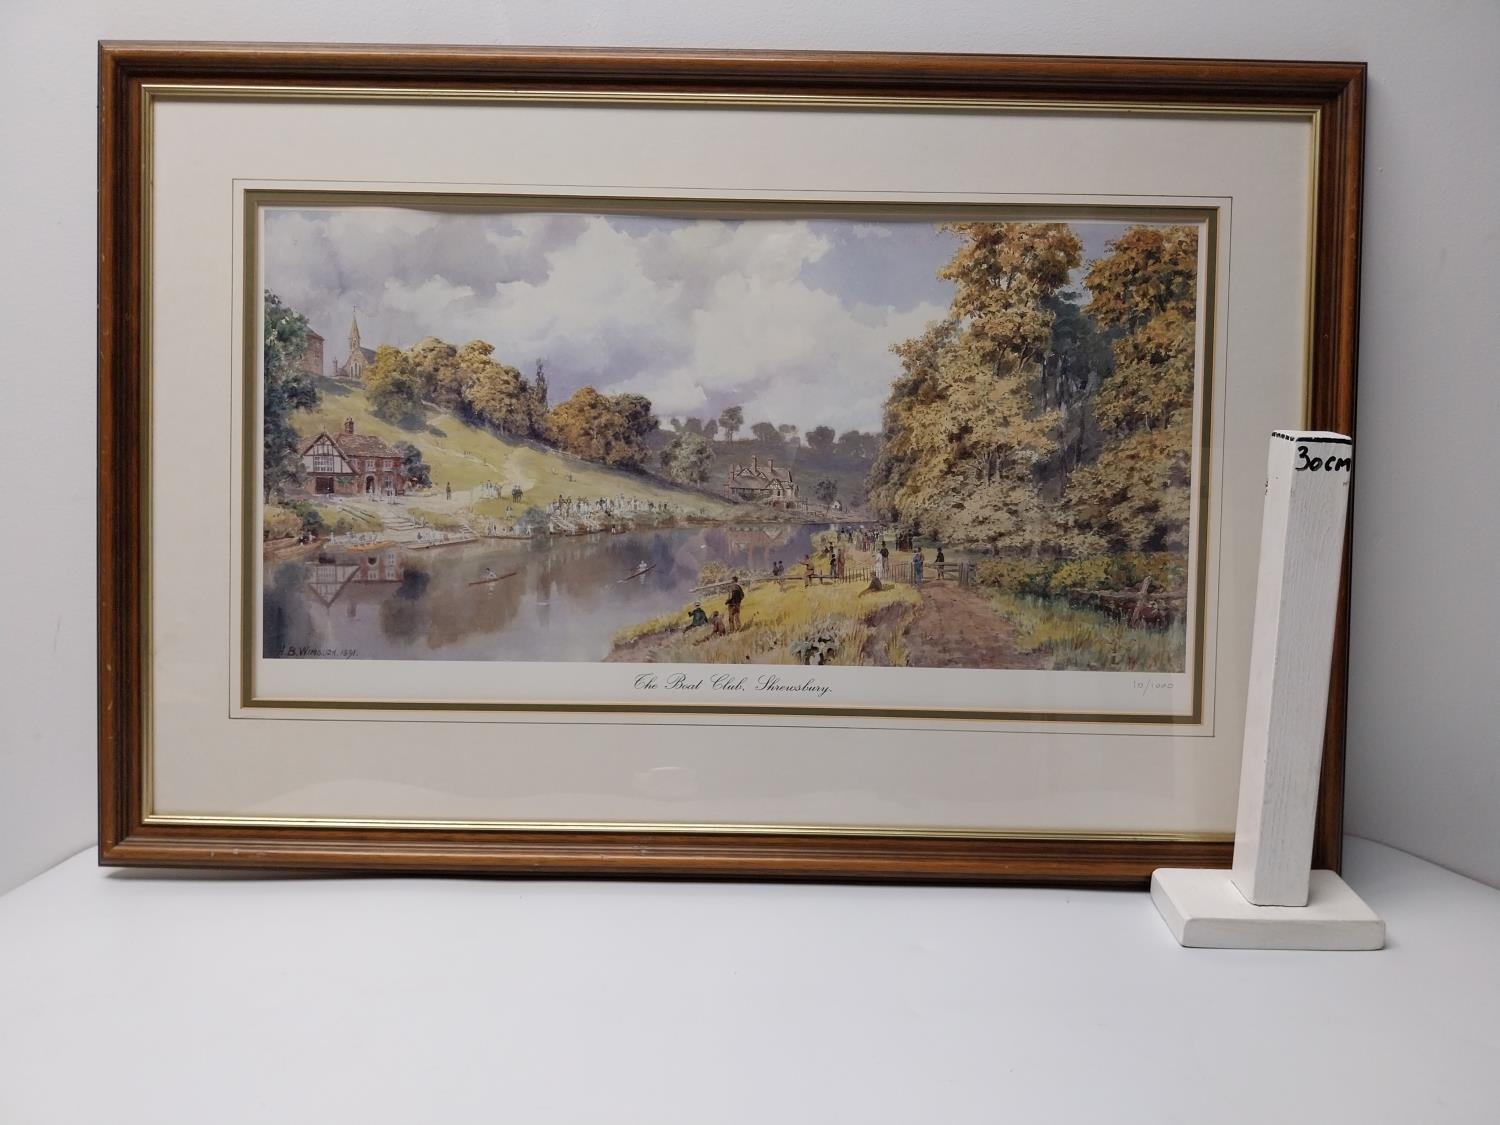 A framed and glazed reproduction of The Boat Club Shrewsbury, H. B. Winbush, numbered in the margin. - Image 6 of 6